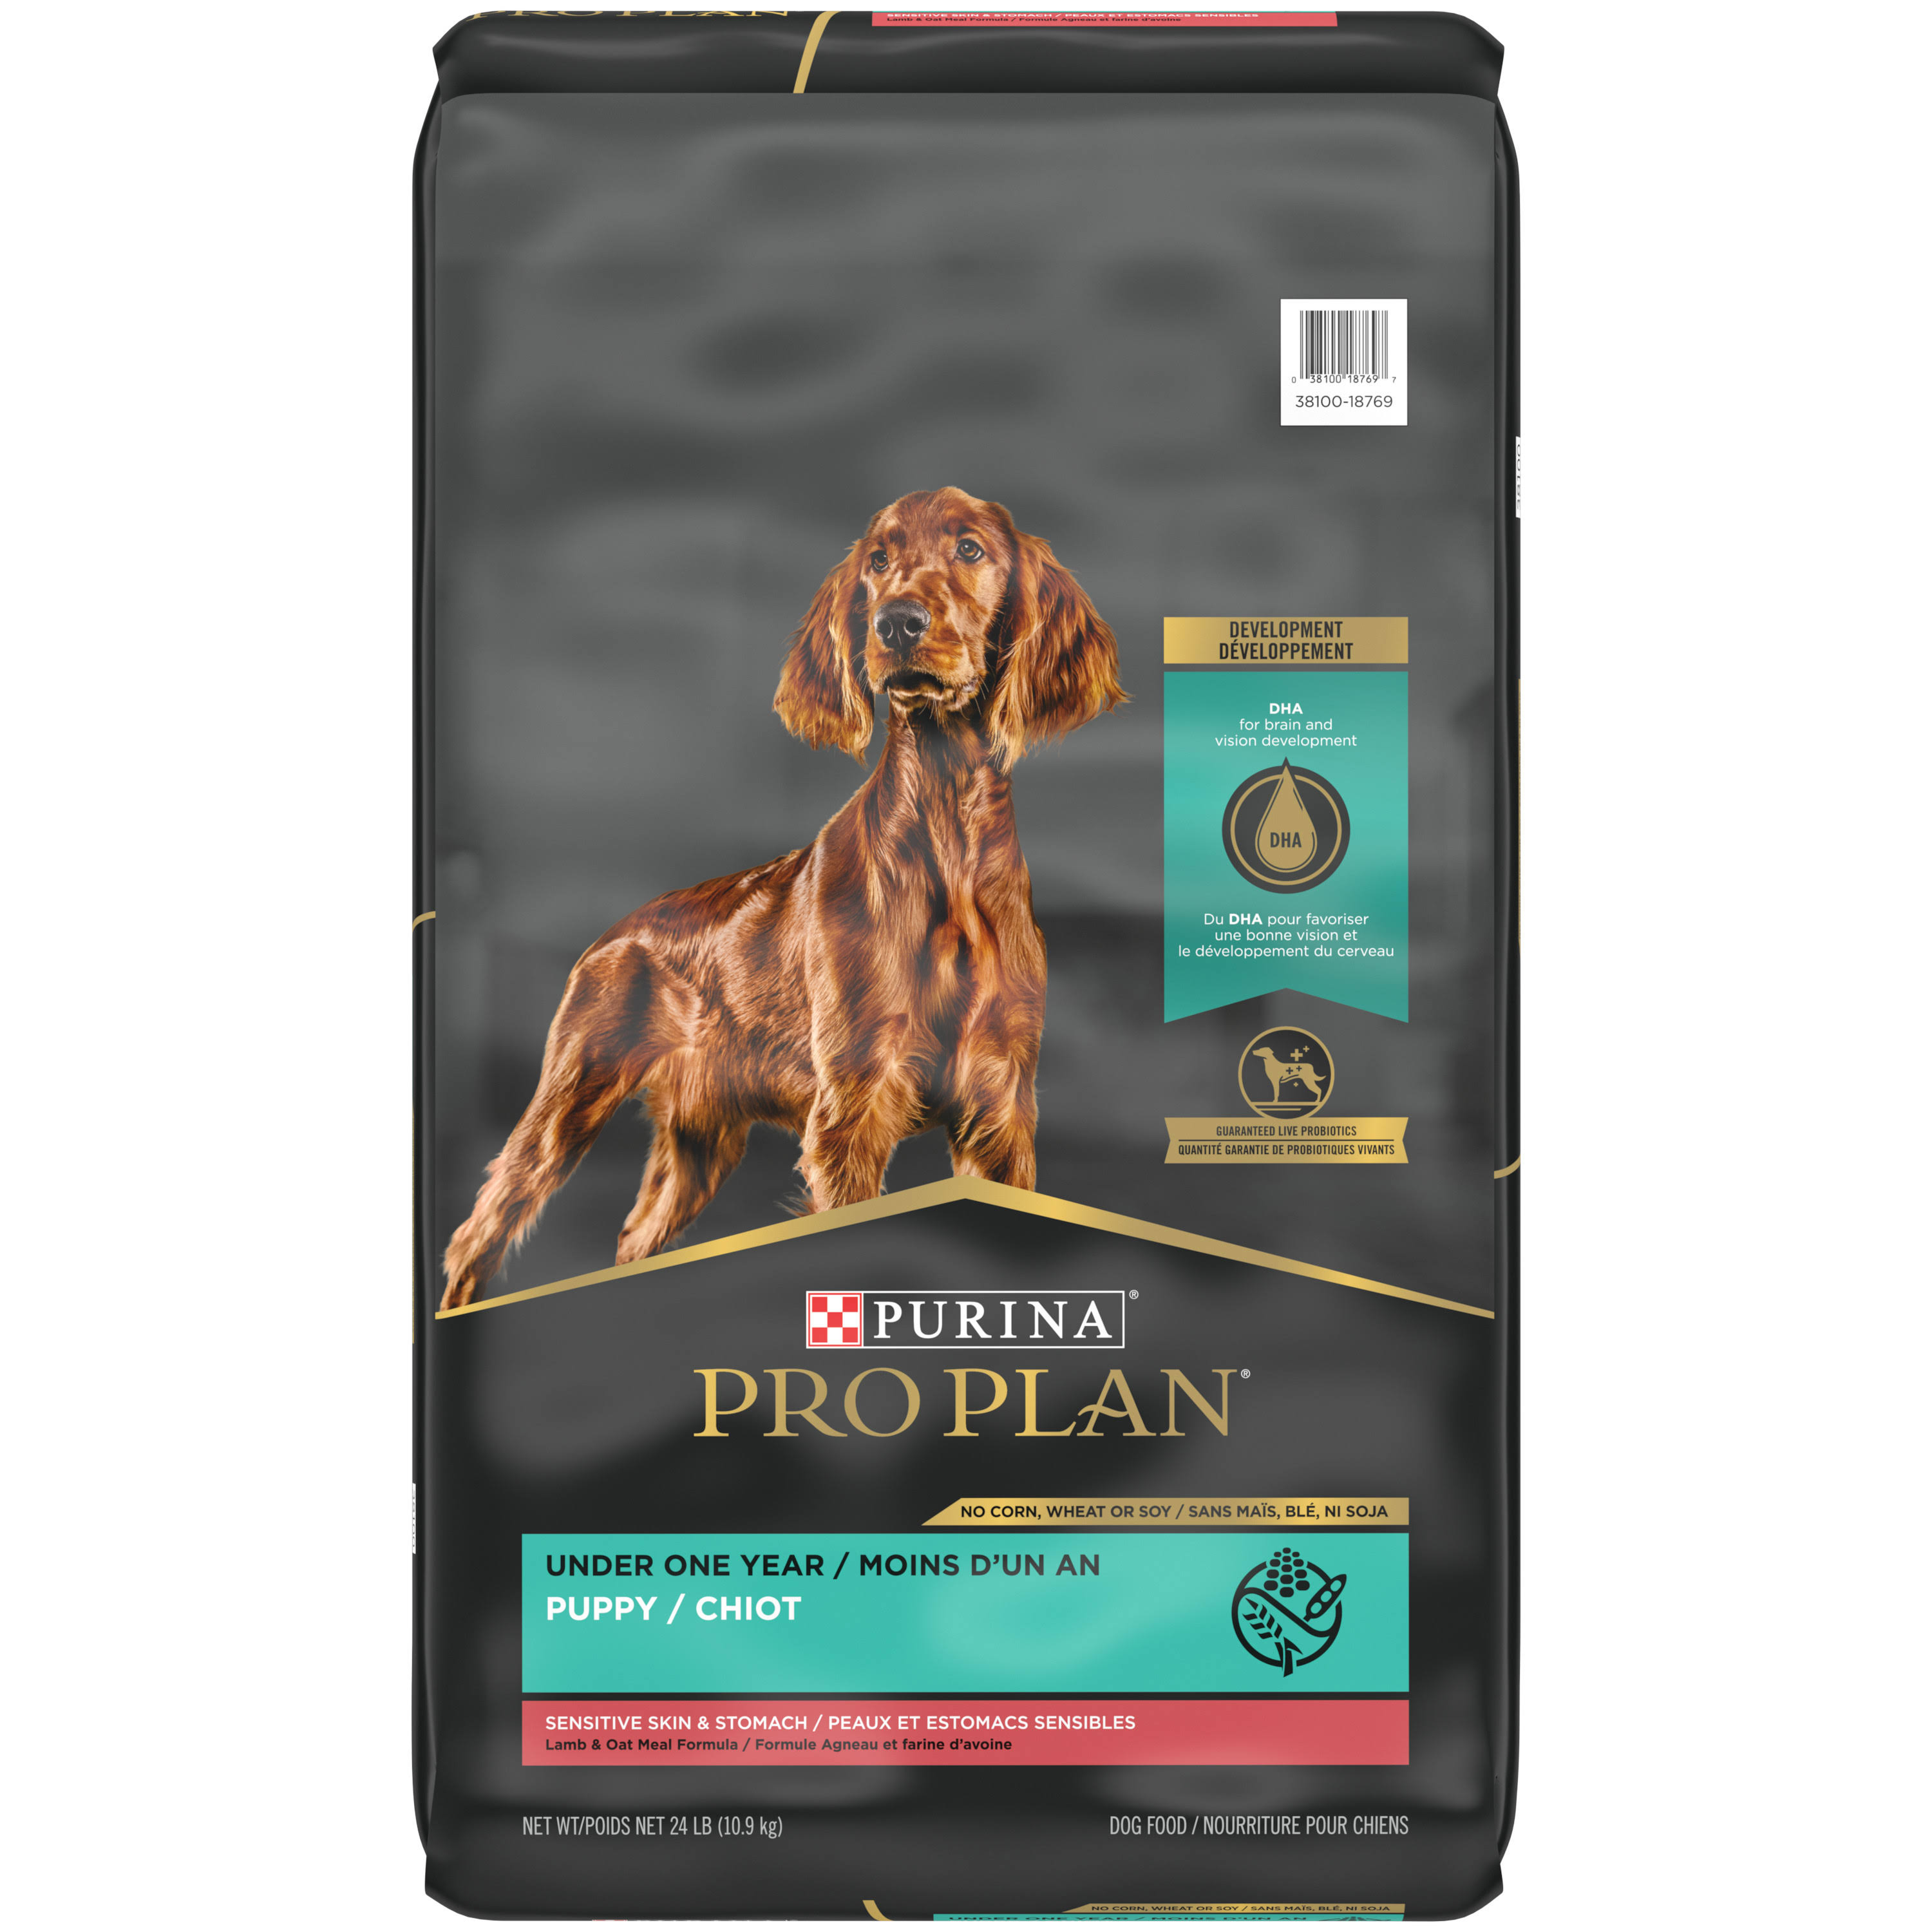 Purina Pro Plan Sensitive Skin & Stomach Lamb & Oat Meal Dry Puppy Food 24 lbs.